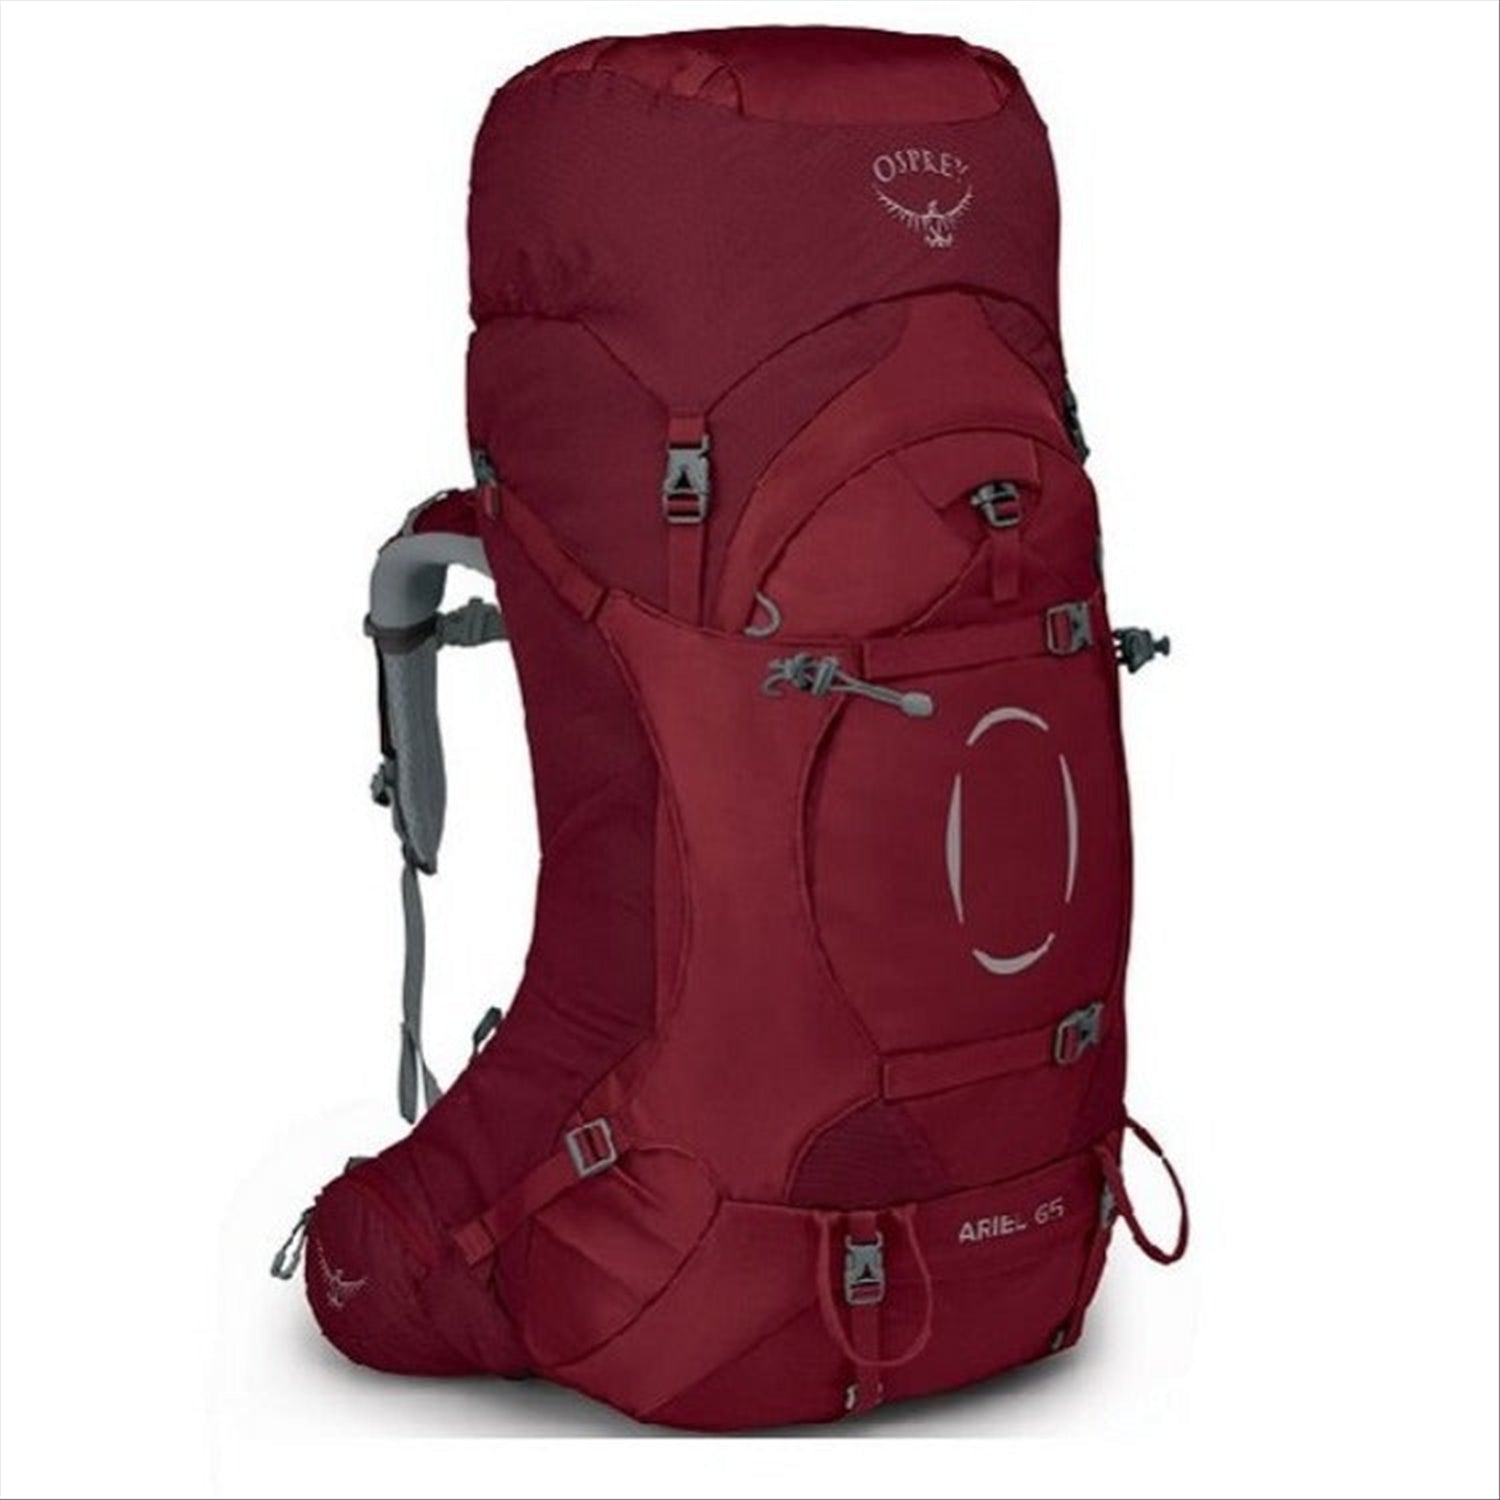 Osprey Ariel 65 Backpack - Hiking Backpacks from Intents Outdoors